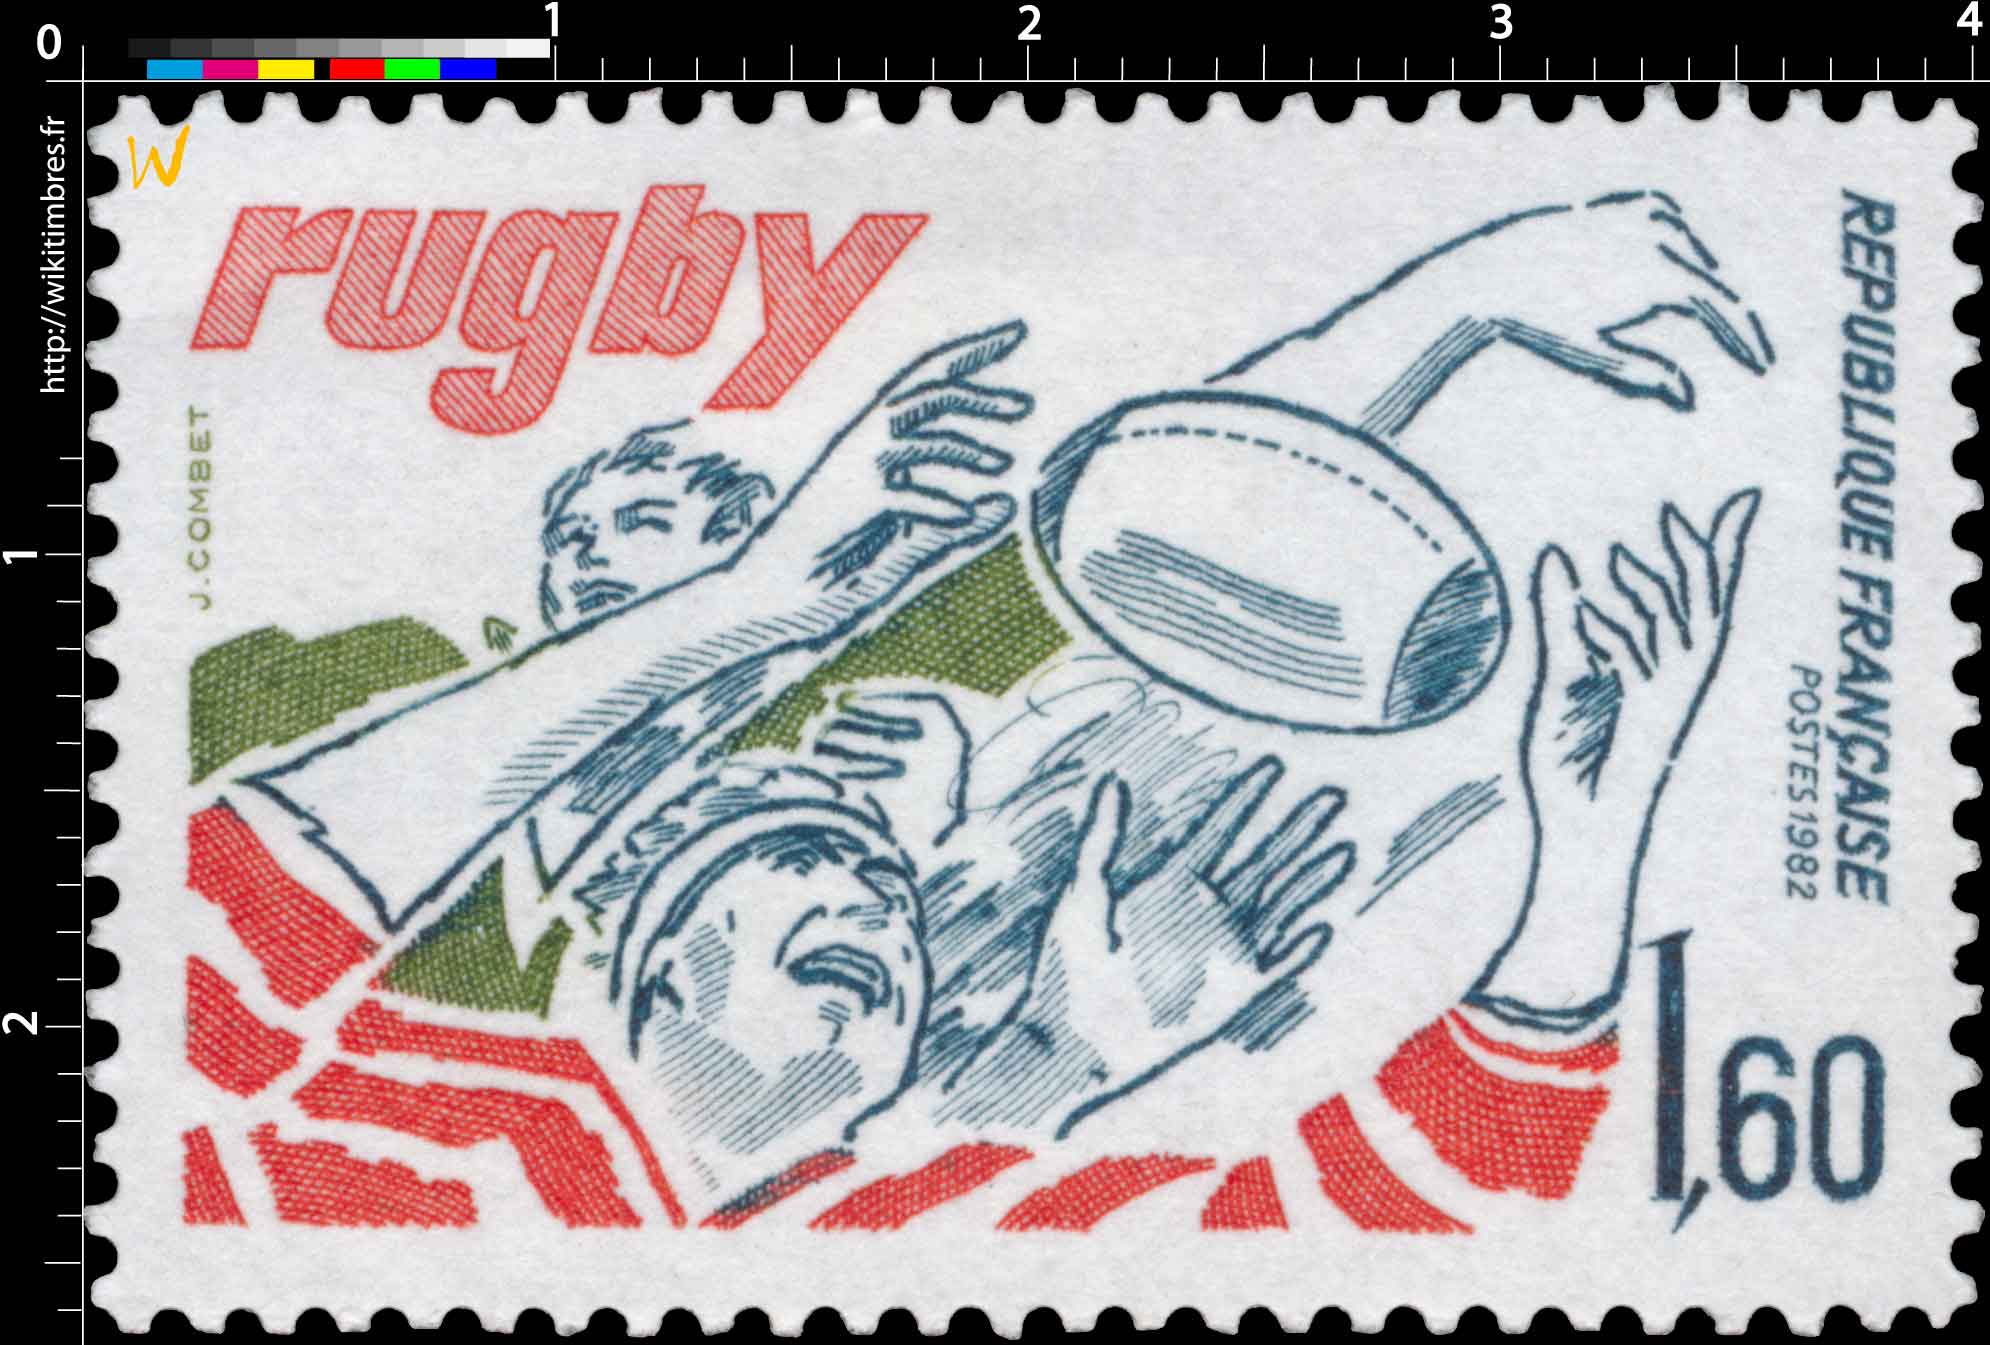 1982 Rugby